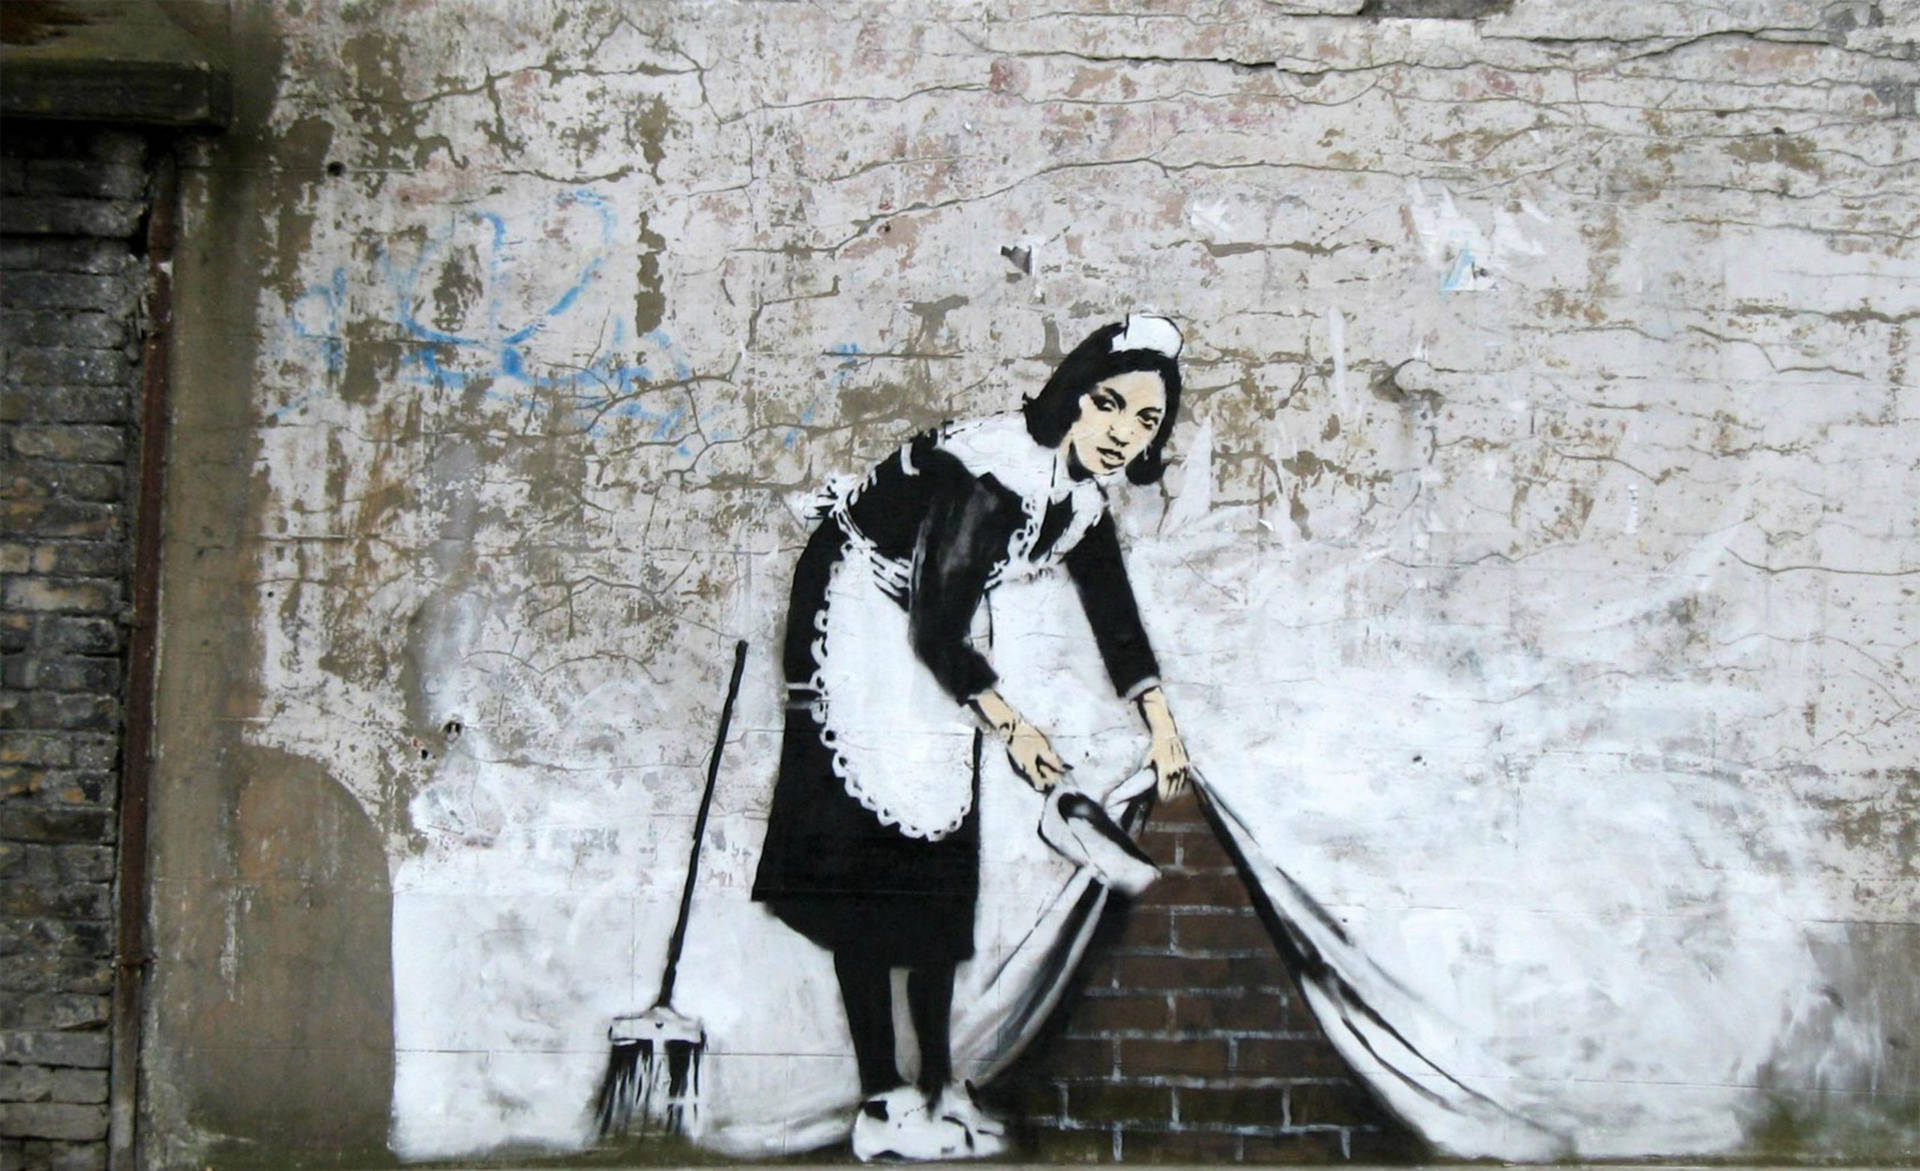 A Profound Display Of Street Art By Banksy Wallpaper